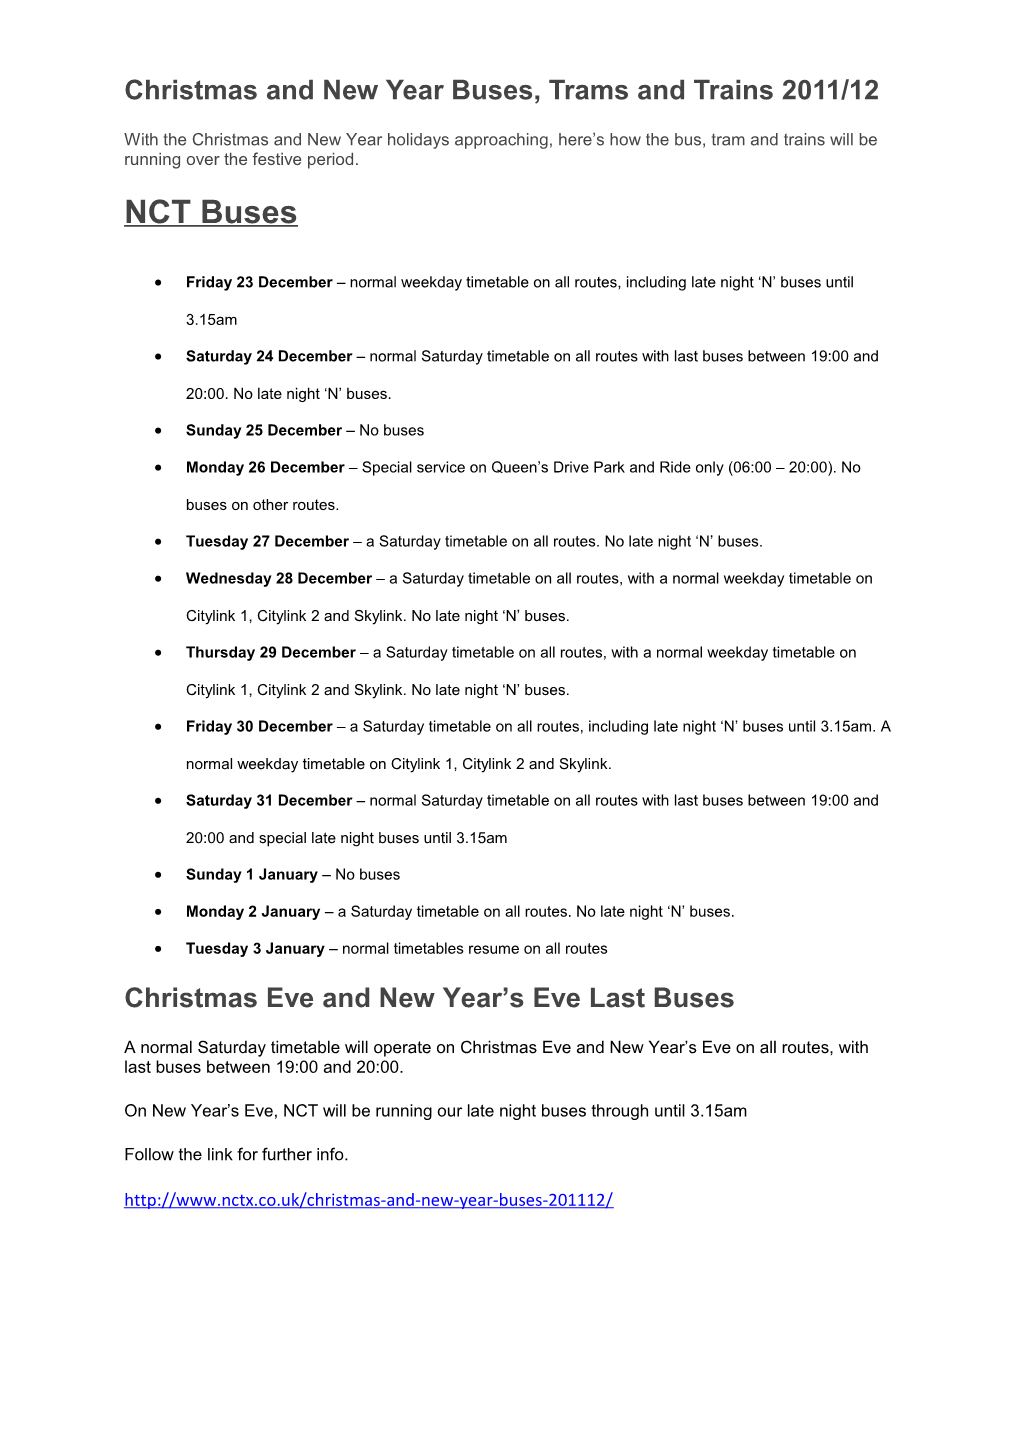 Christmas and New Year Buses, Trams and Trains 2011/12